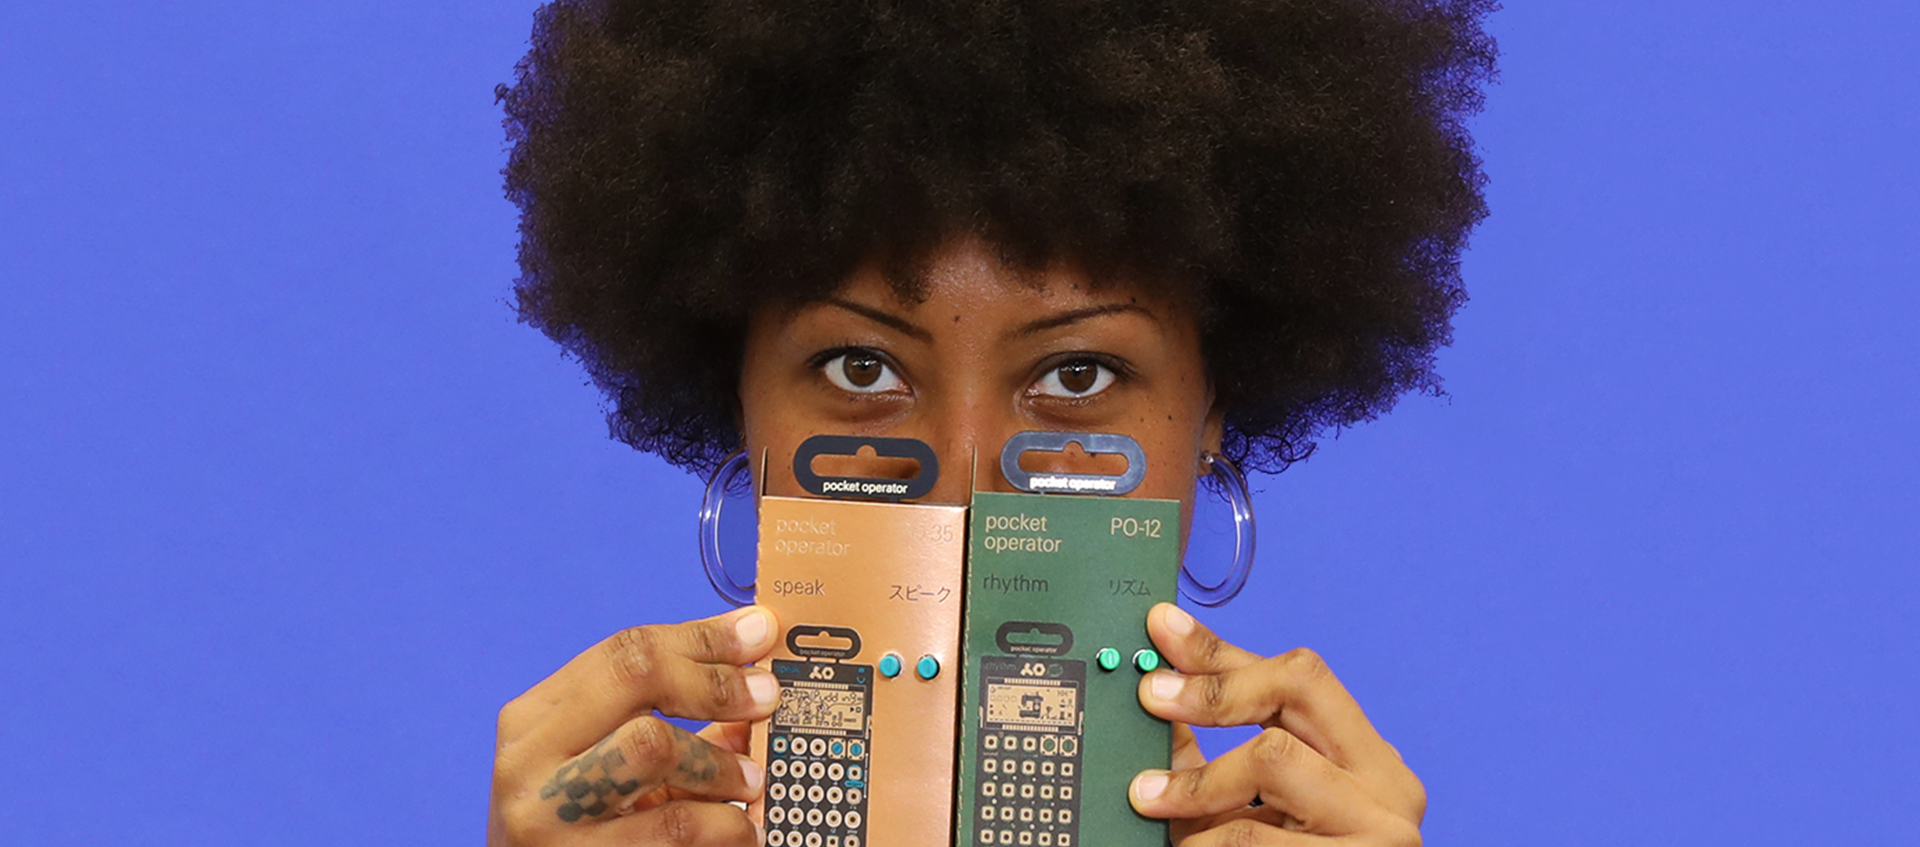 Wexner Center for the Arts House Management staffer Valerie Glenn with holiday gift suggestion of Pocket Operators portable synthesizers by Teenage Engineering